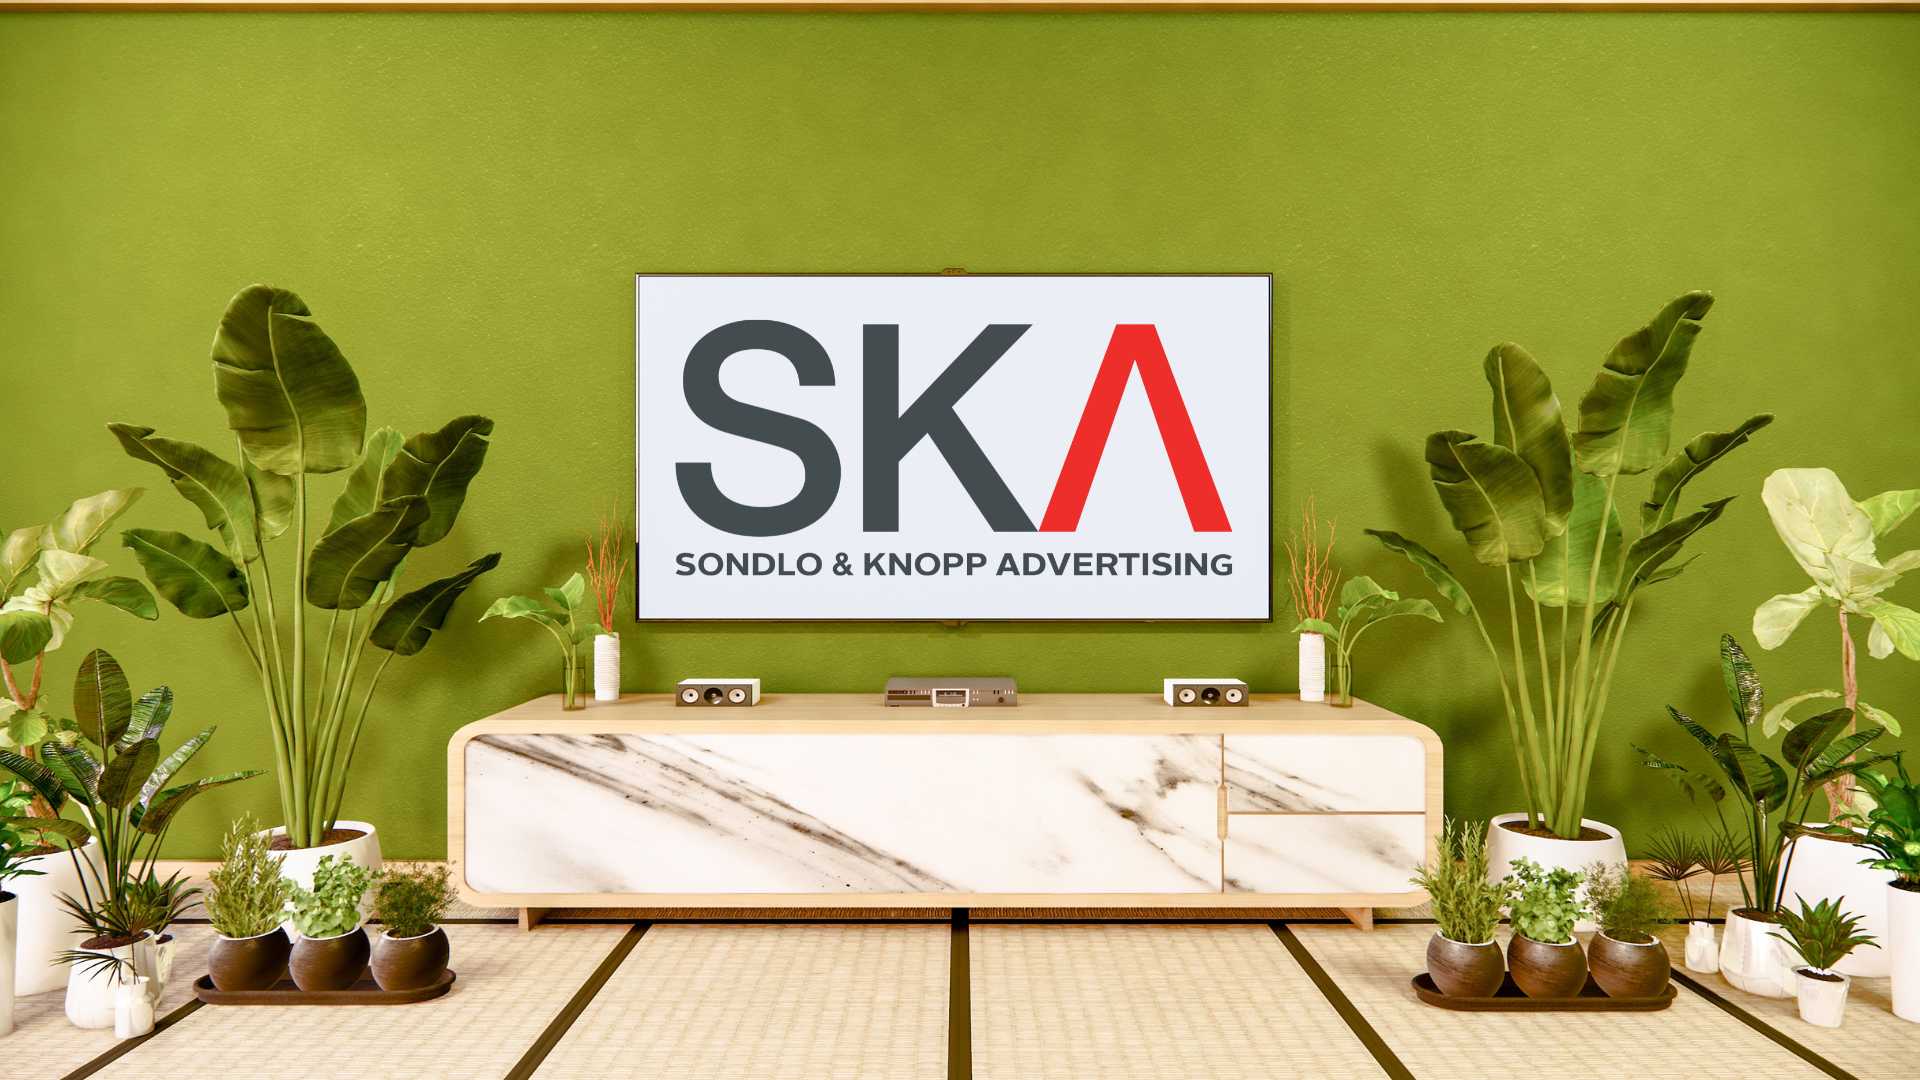 Sondlo & Knopp Advertising Agency South Africa Web Design And Managed Cloud Hosting Services